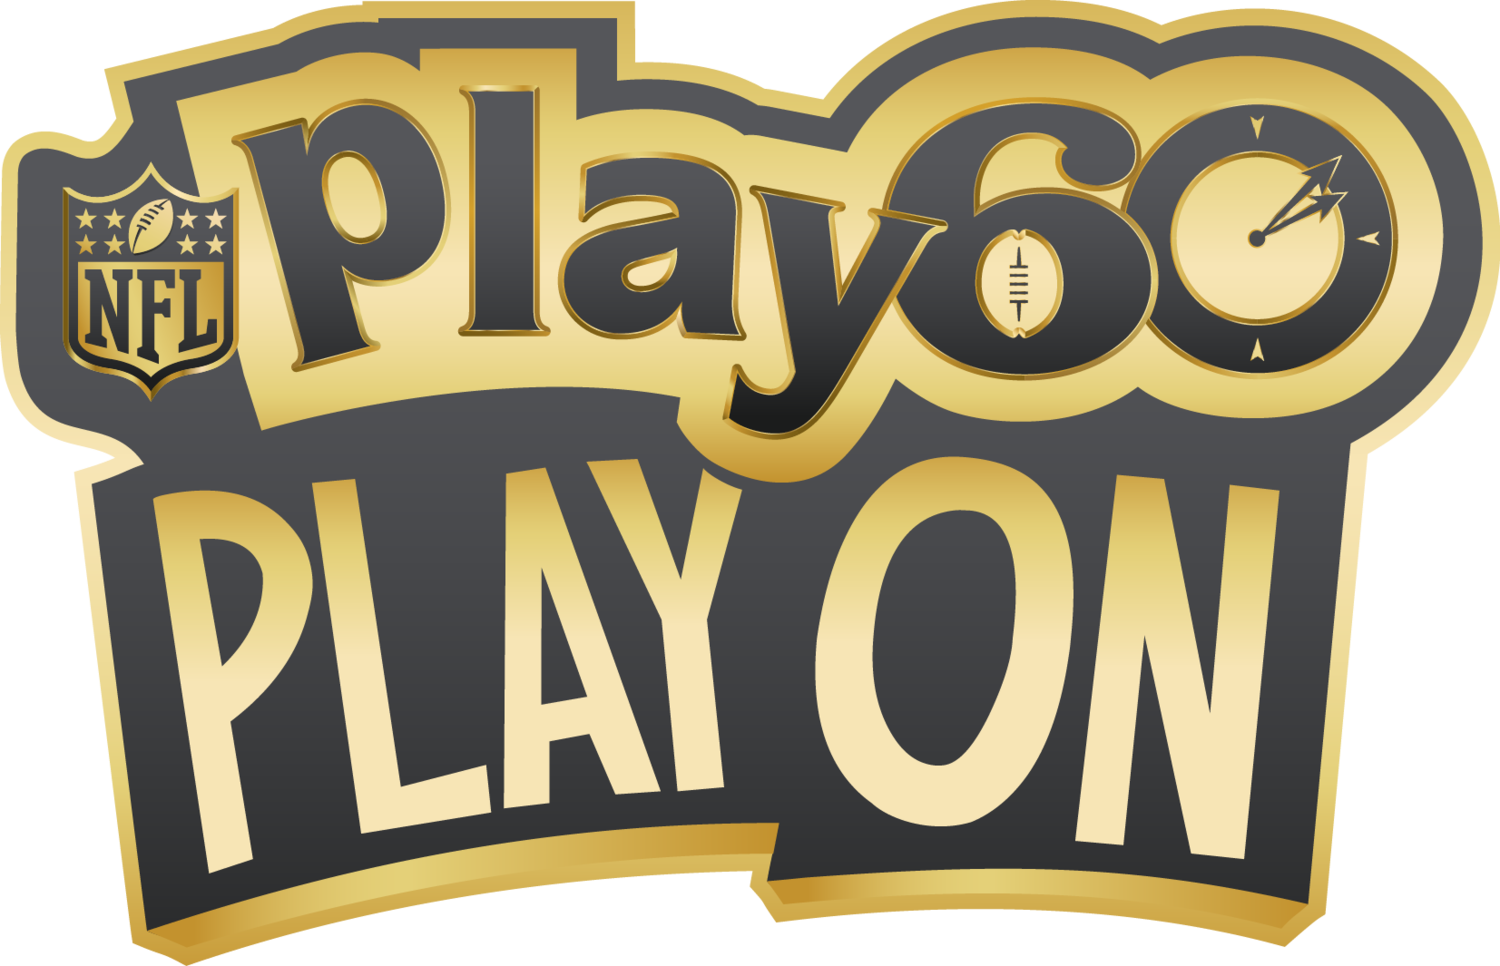 PLAY 60, Play On